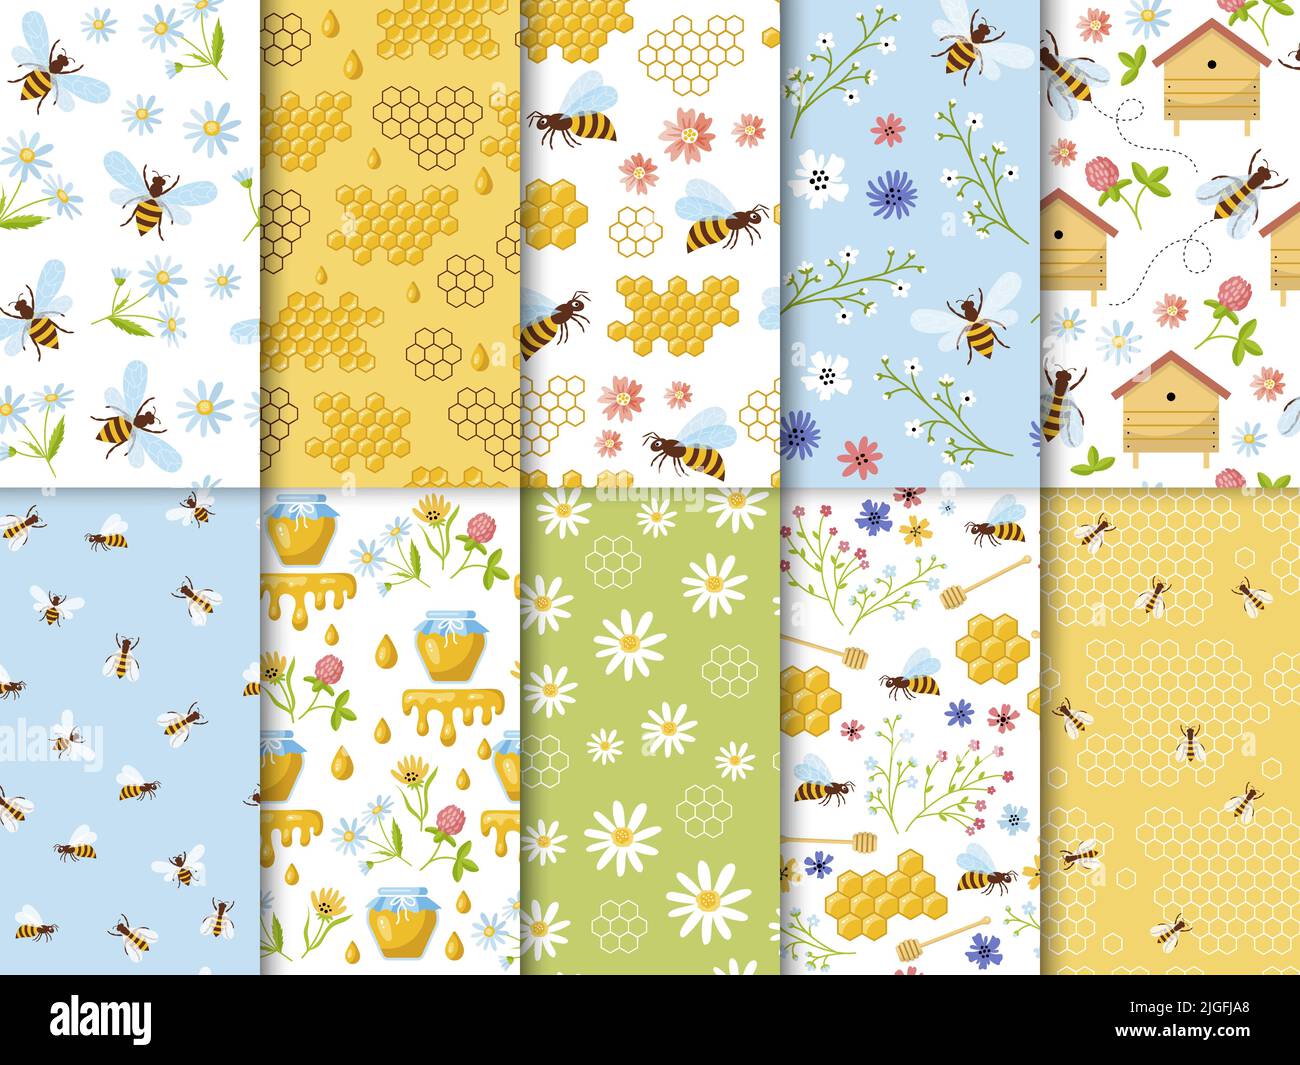 Apiary pattern. Wax bees healthy natural honey farms recent vector seamless backgrounds for textile design projects Stock Vector